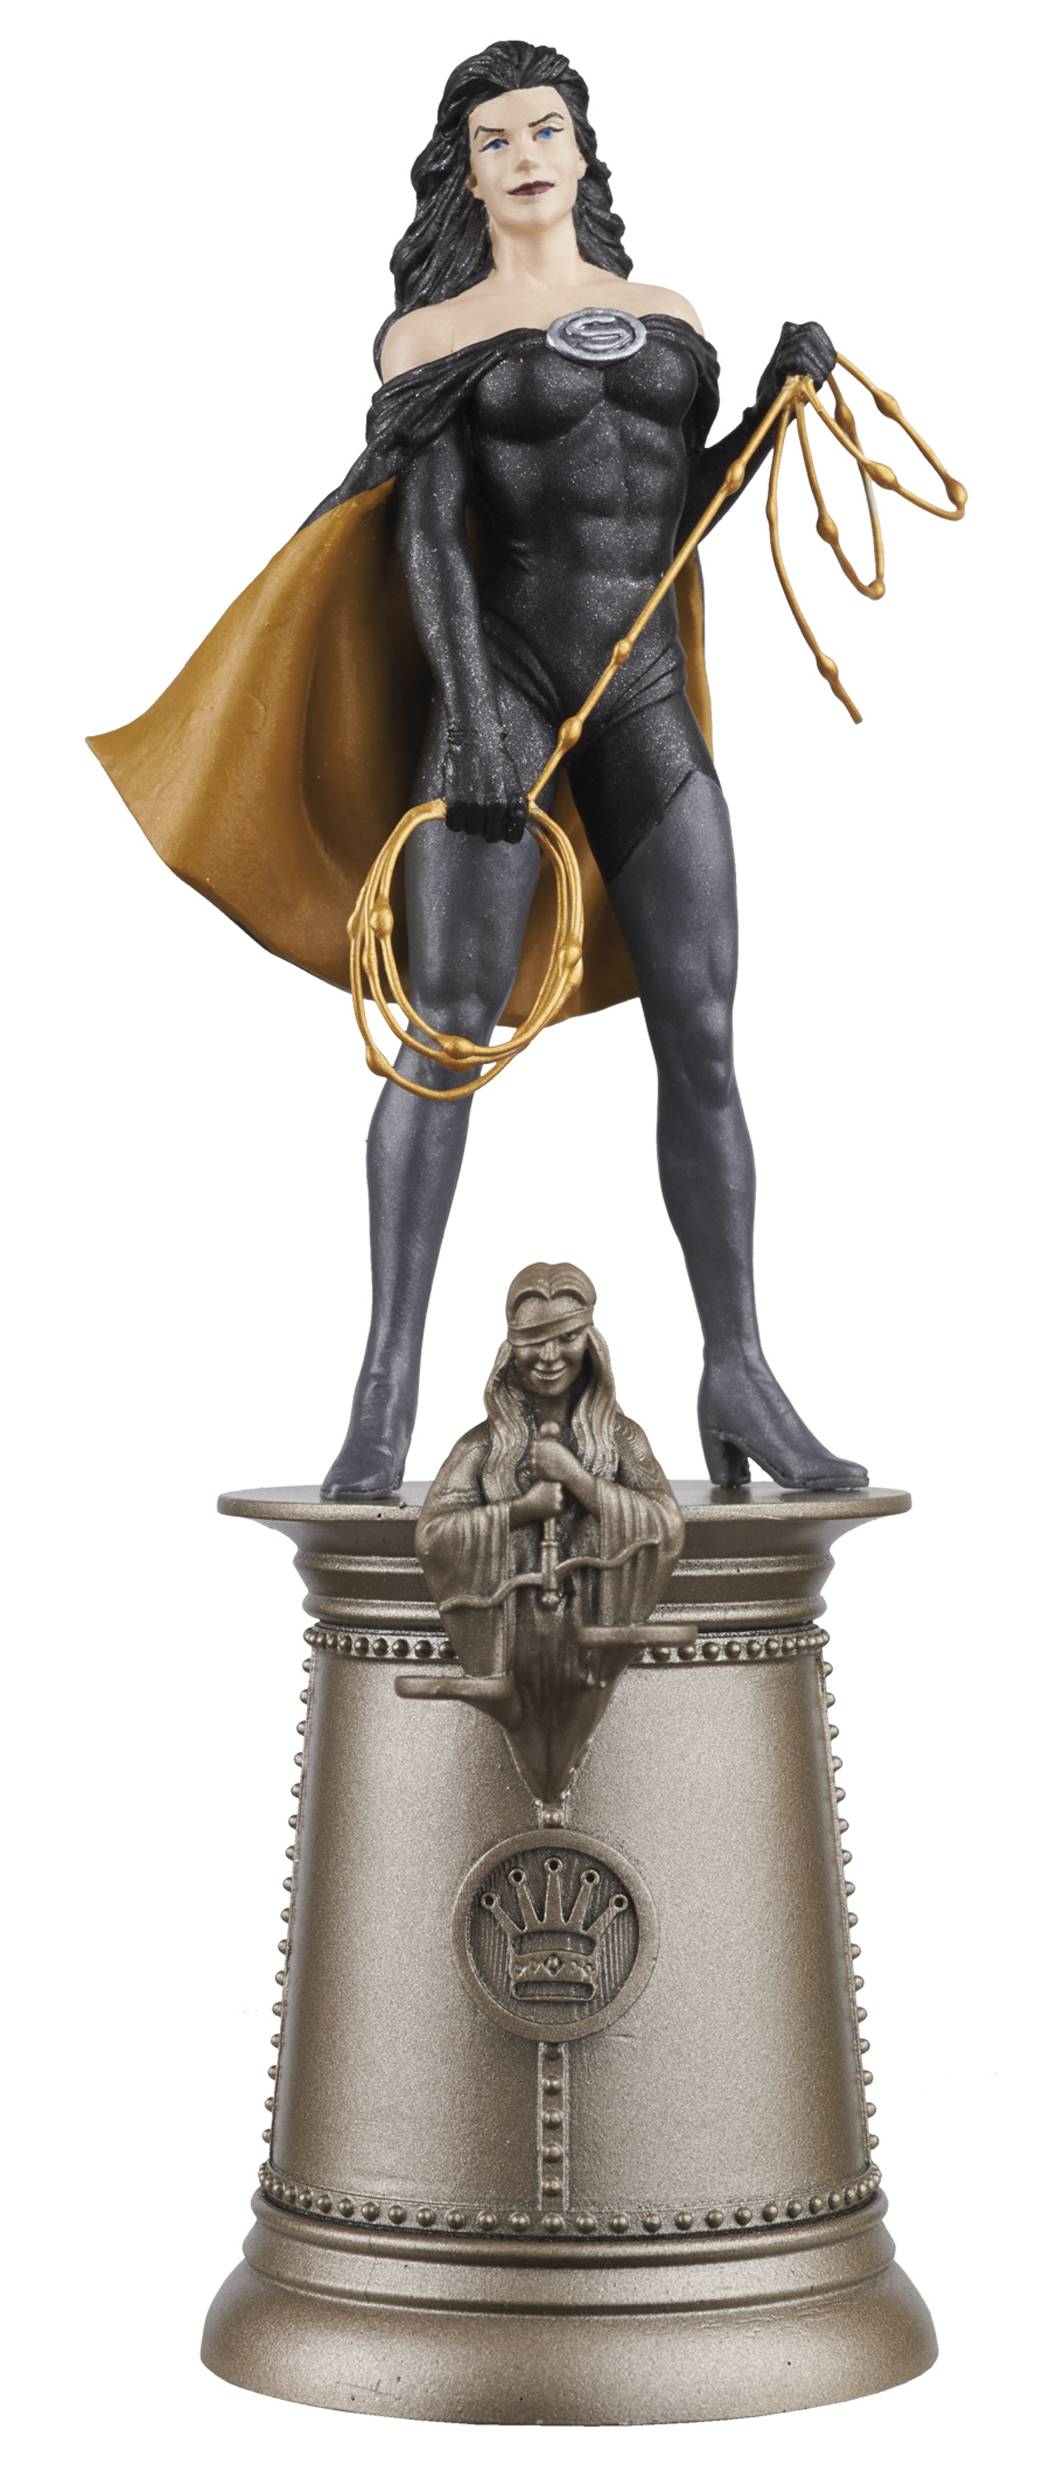 DC Superhero Chess Fig Collected Mag #69 Superwoman Black Queen